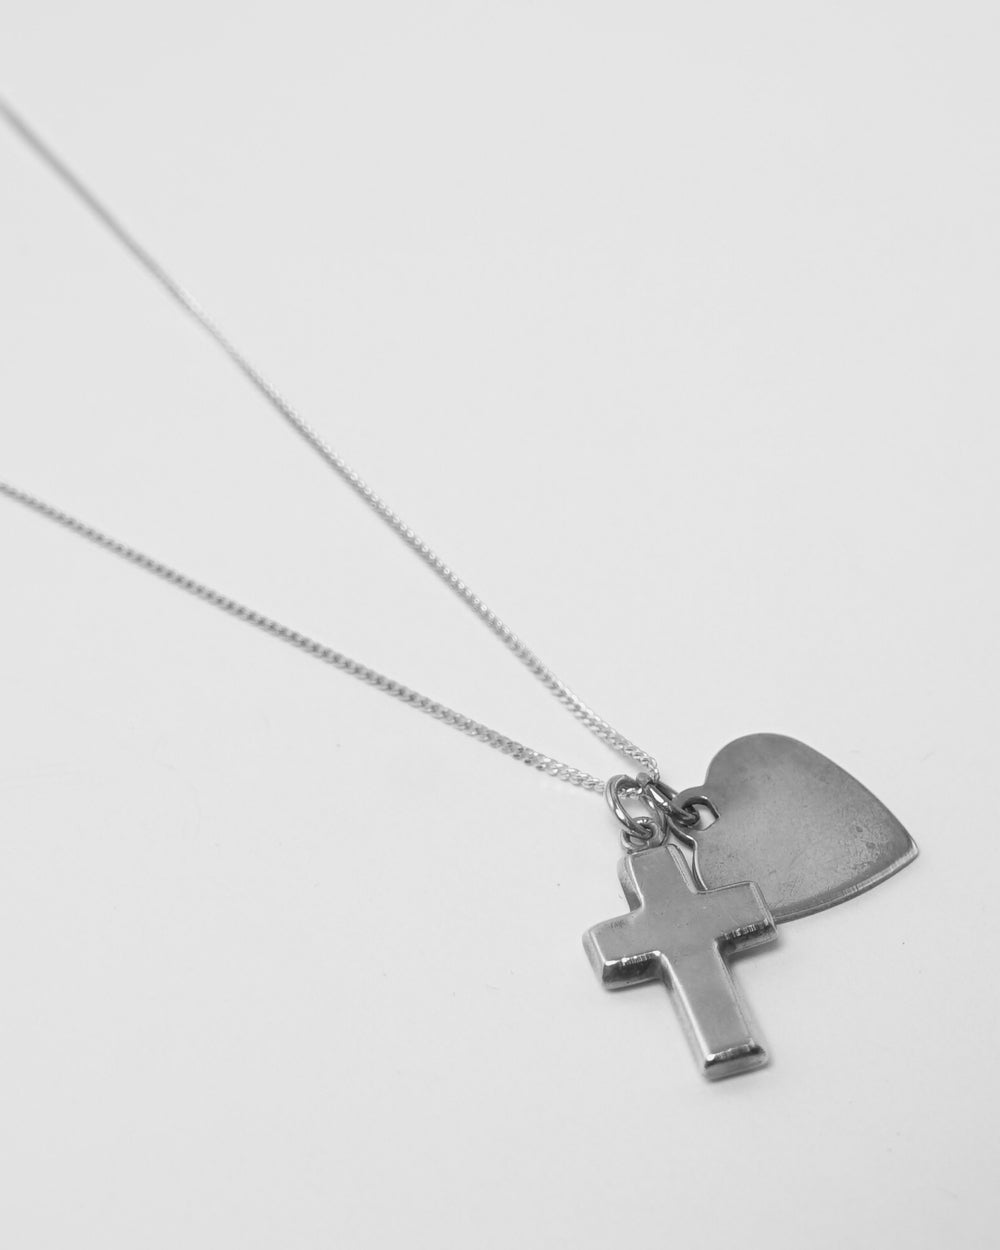 Silver Chain Necklace w/ Heart & Cross Charm